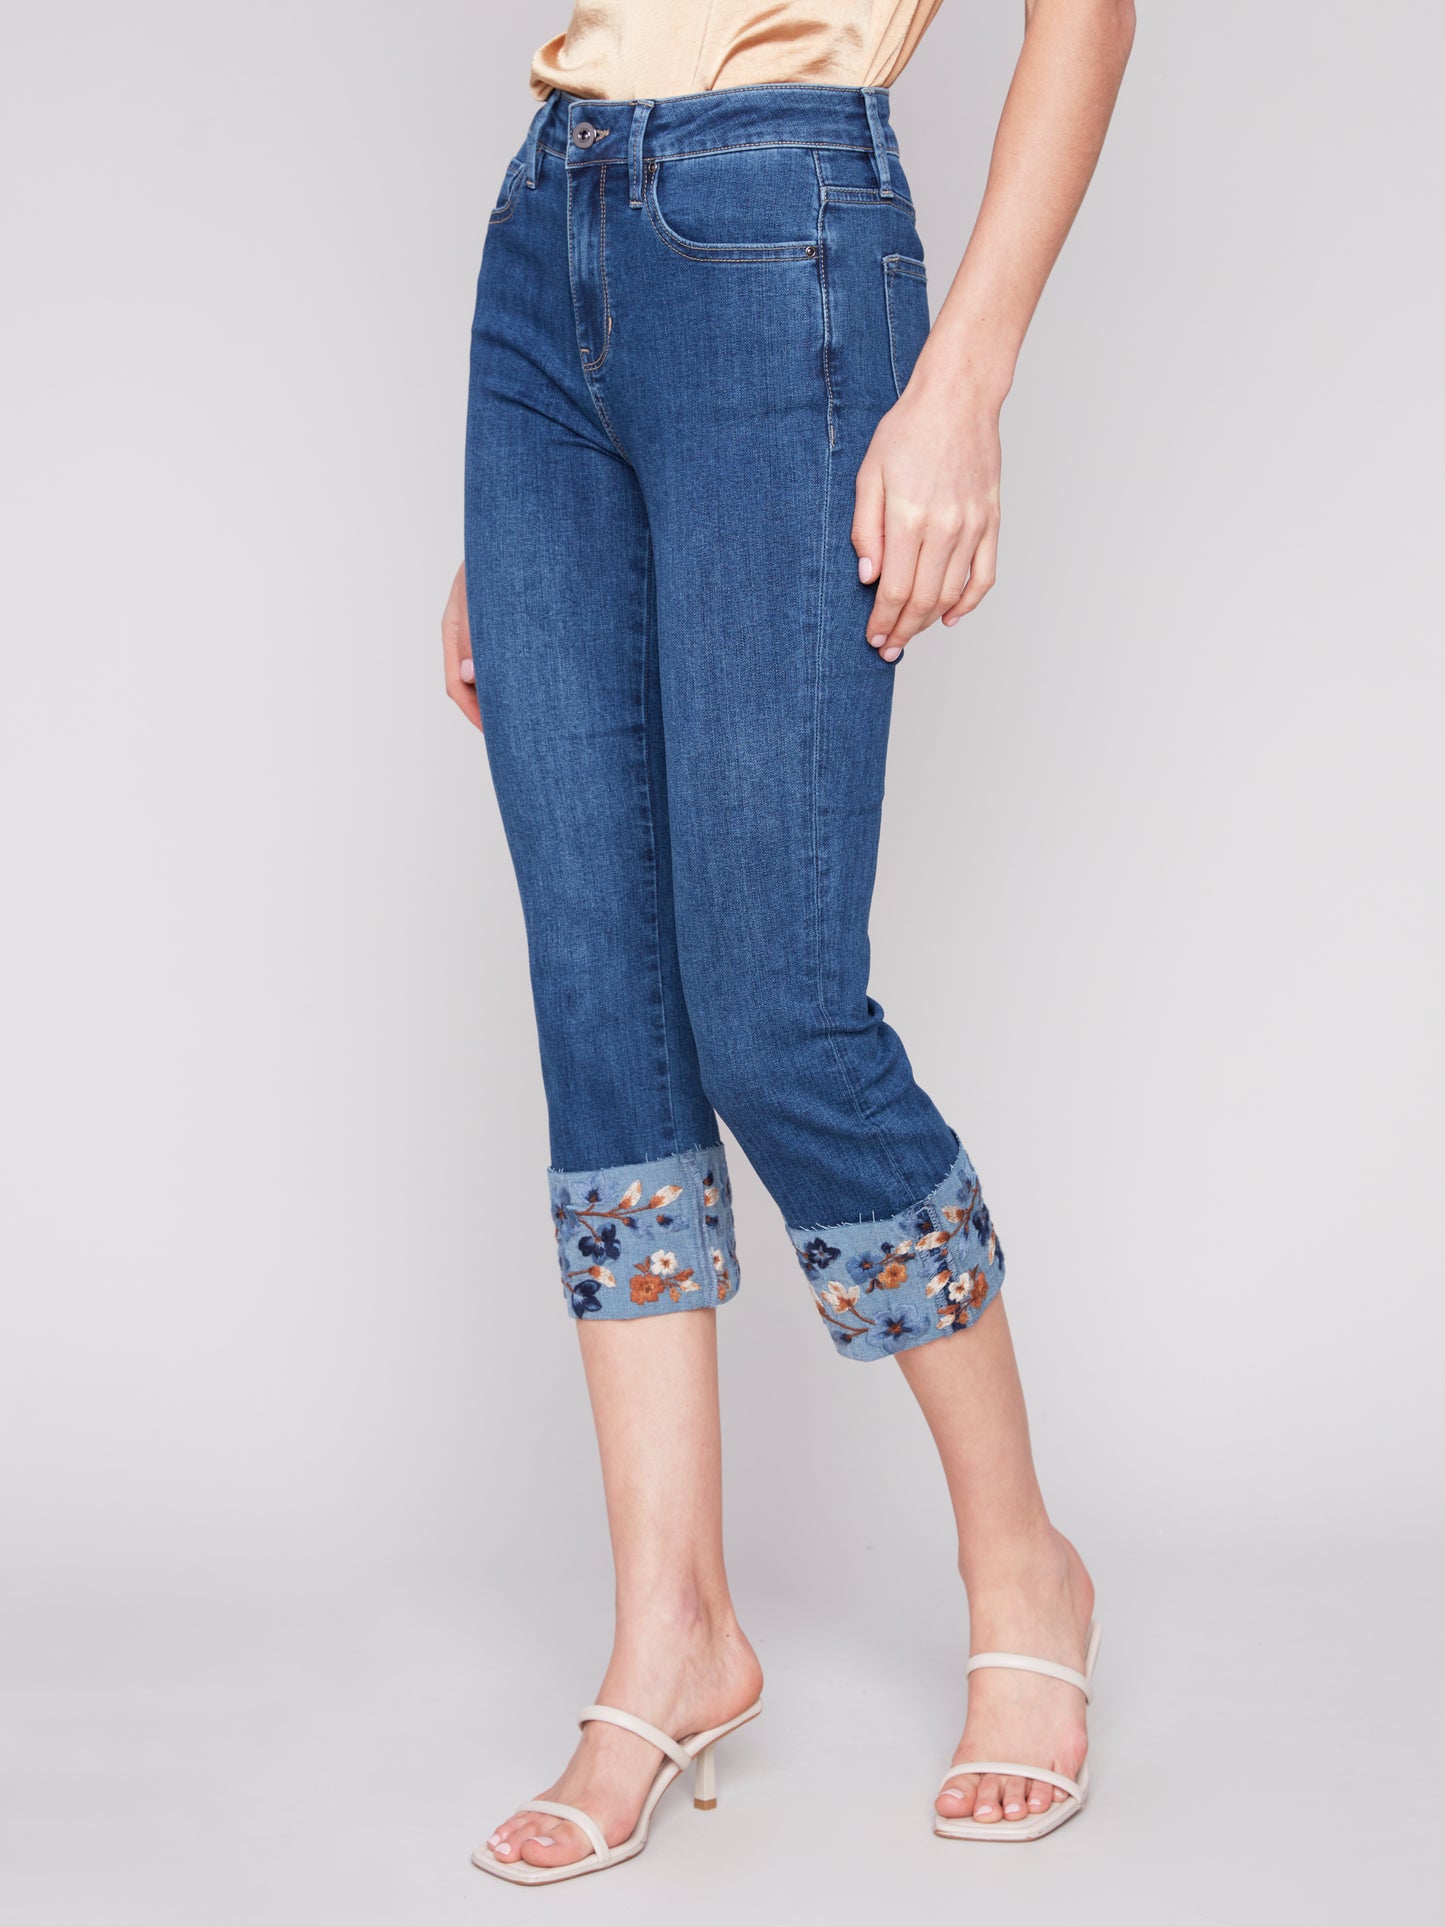 A woman wearing a pair of Charlie B stylish and versatile jeans with Embroidered Cuffed Ankle Pants.